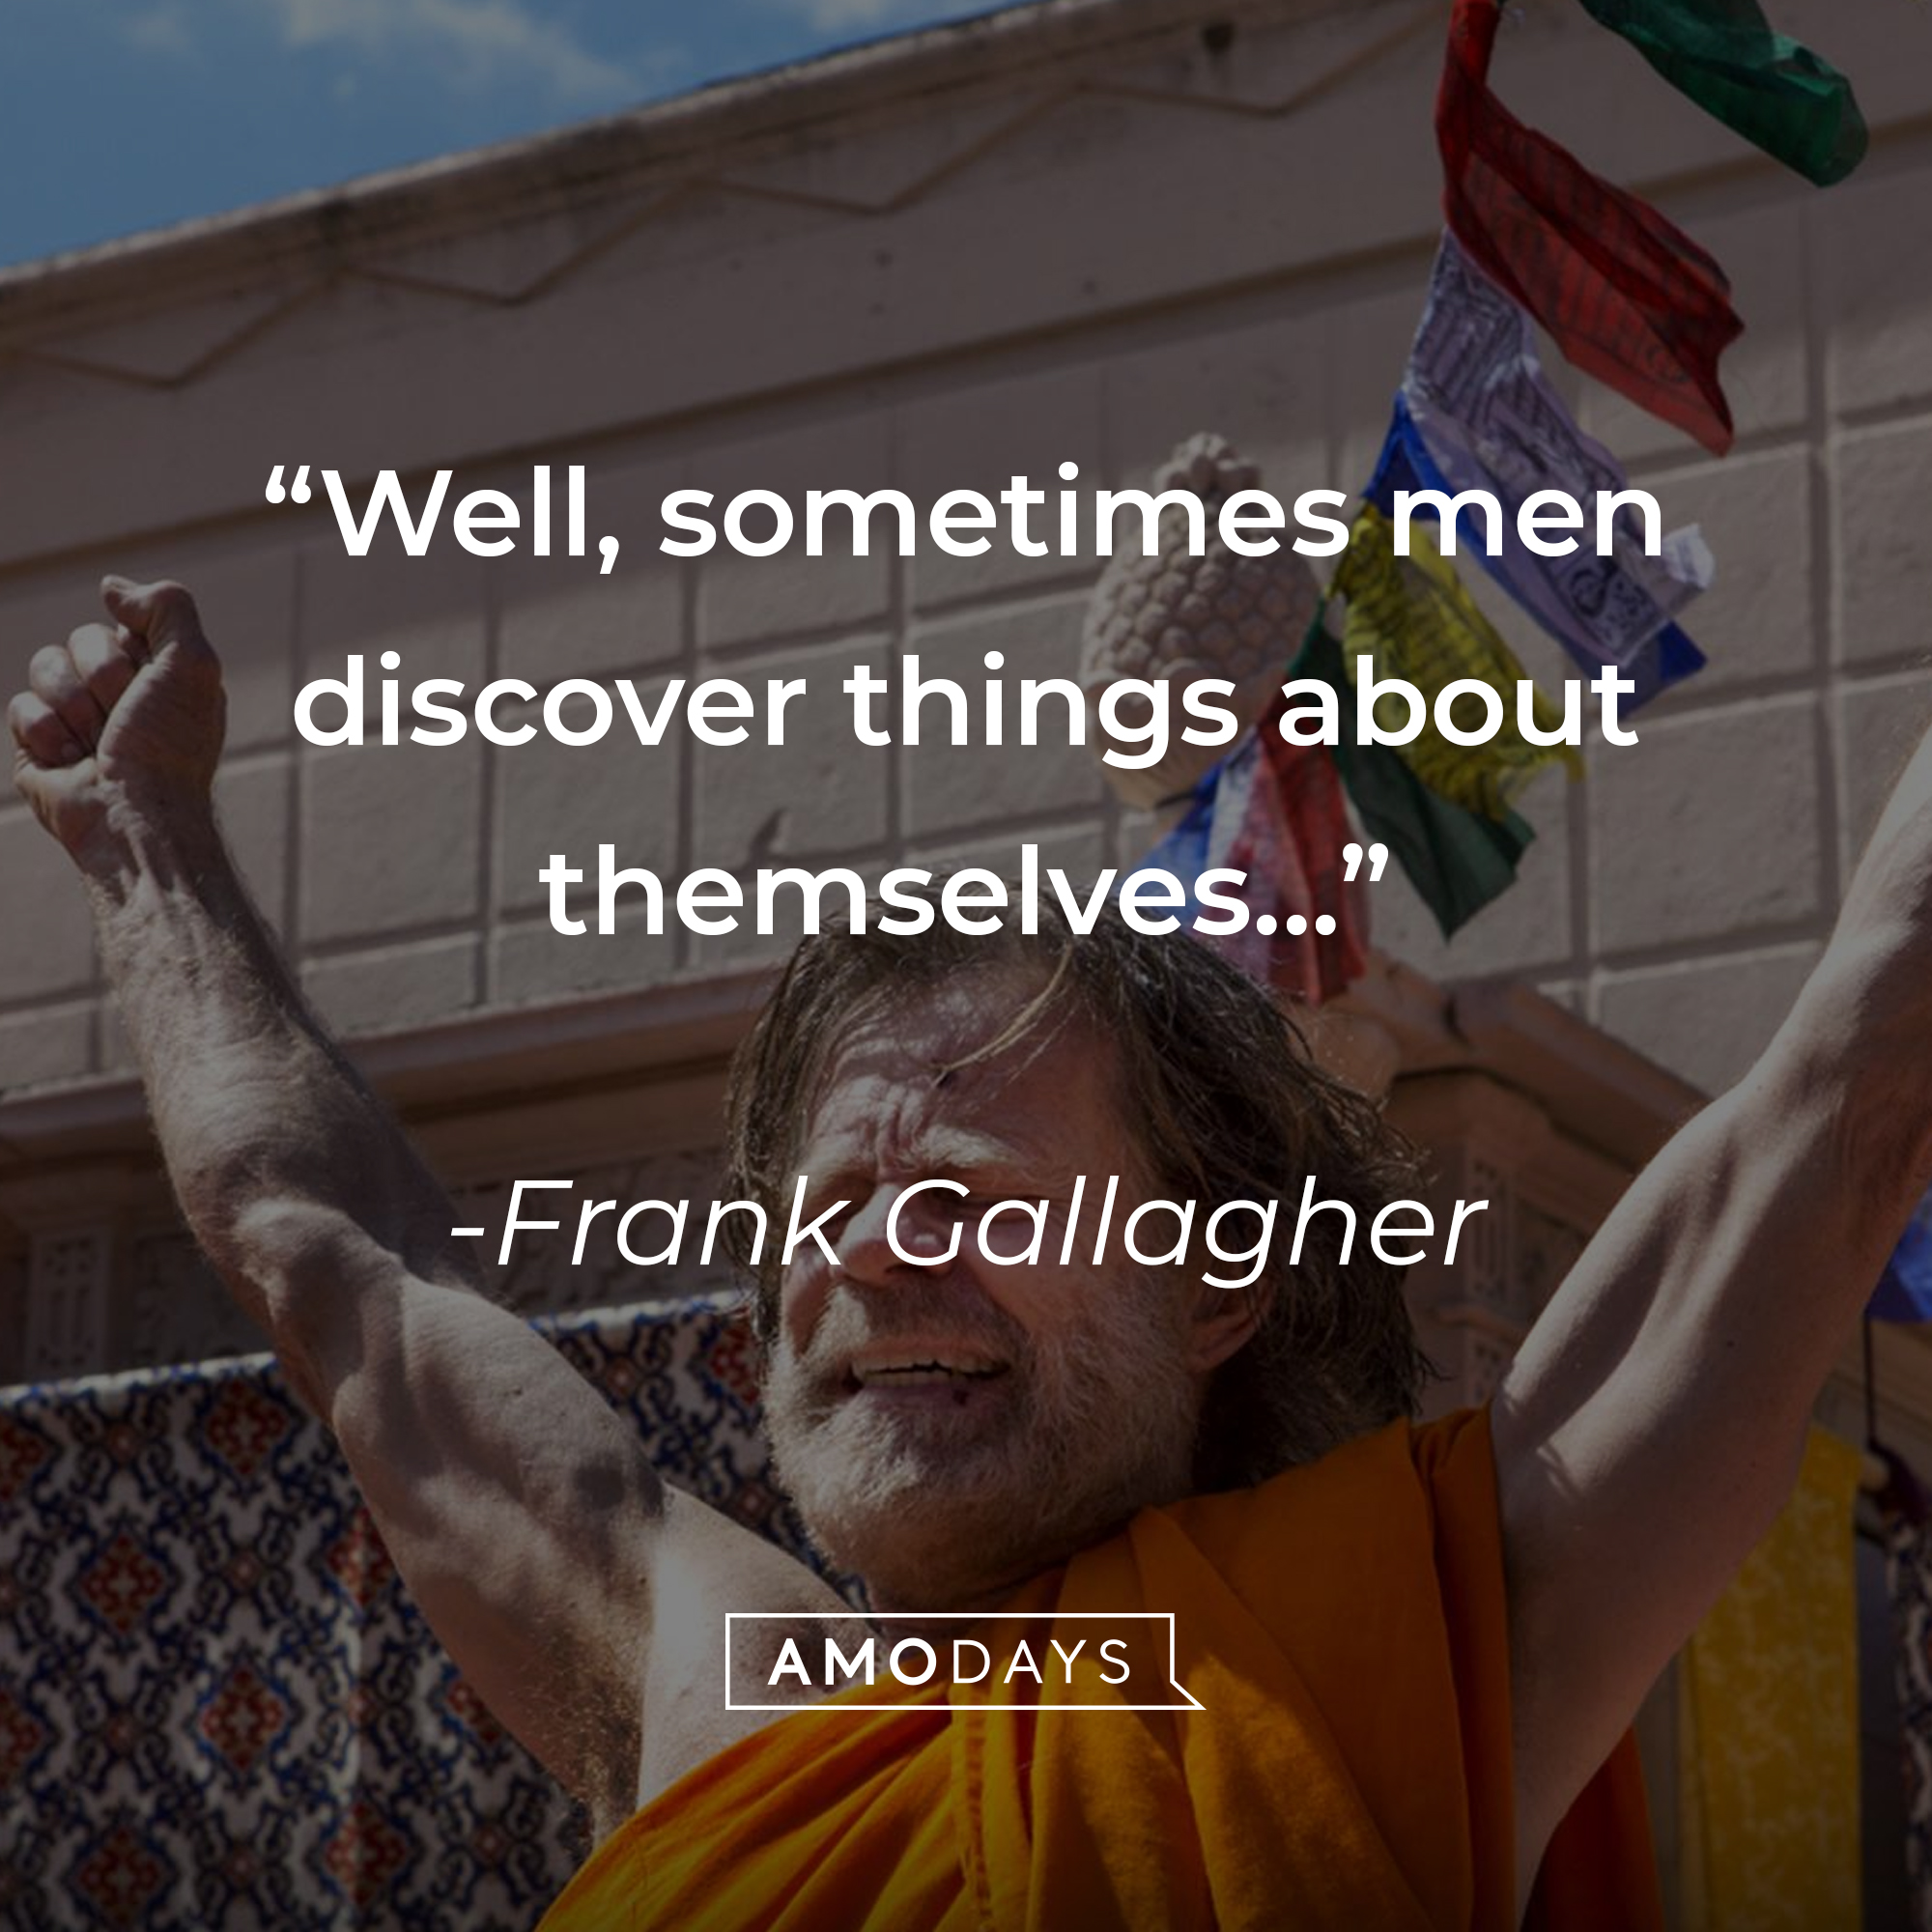 Frank Gallagher's quote: "Well, sometimes men discover things about themselves..." | Source: facebook.com/ShamelessOnShowtime